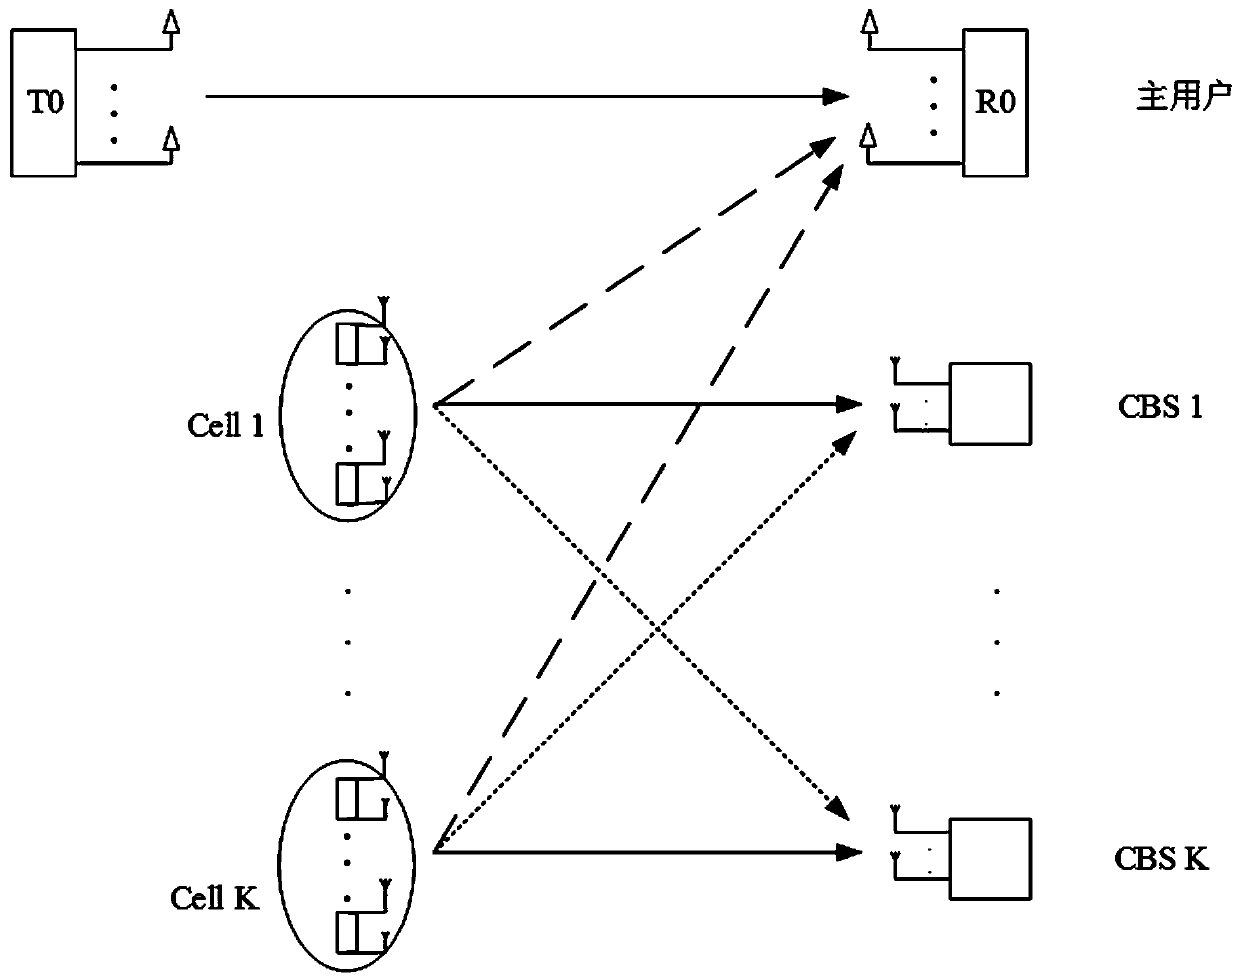 An Equilibrium Field Game Method Based on Selective Disturbance Alignment in Cognitive Systems